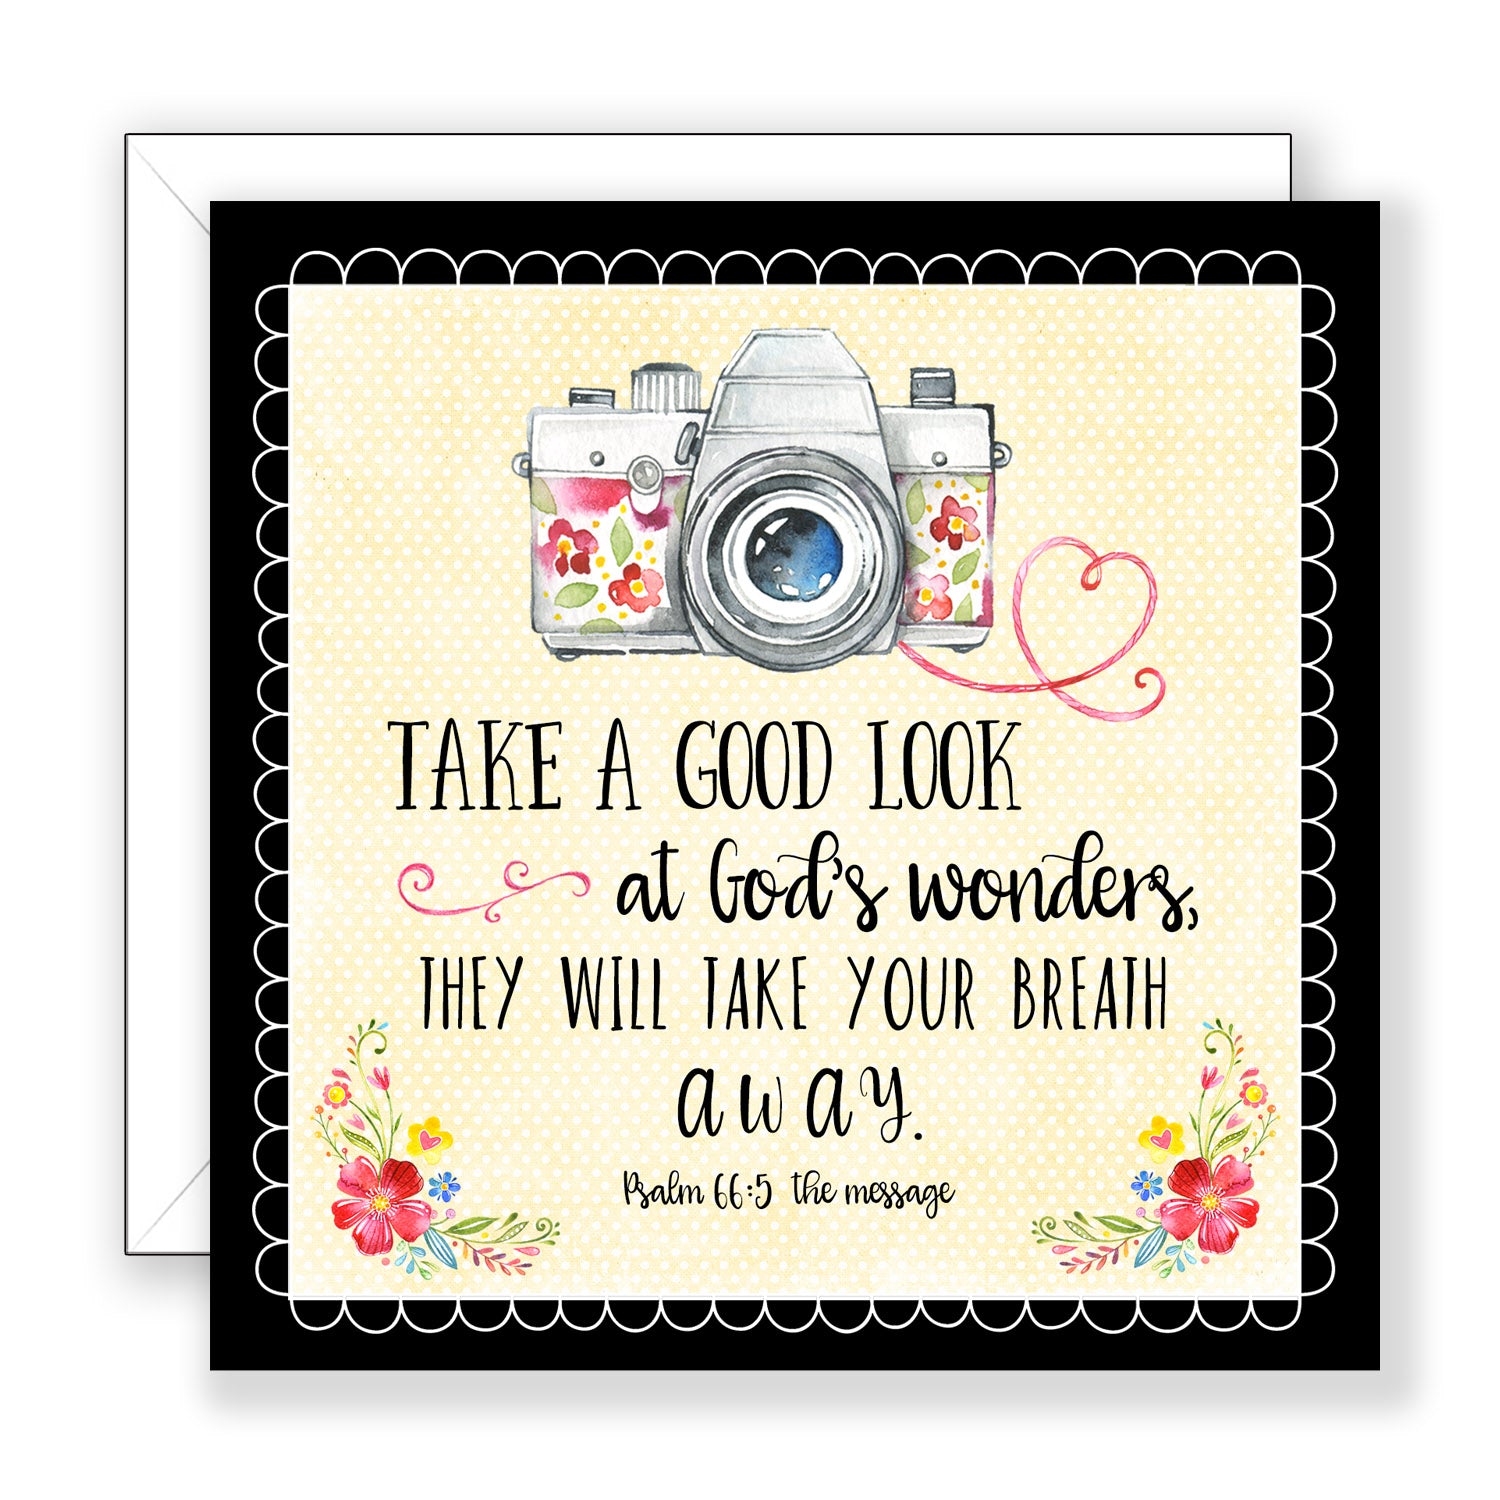 Take A Good Look (Psalm 66:5) - Encouragement Card